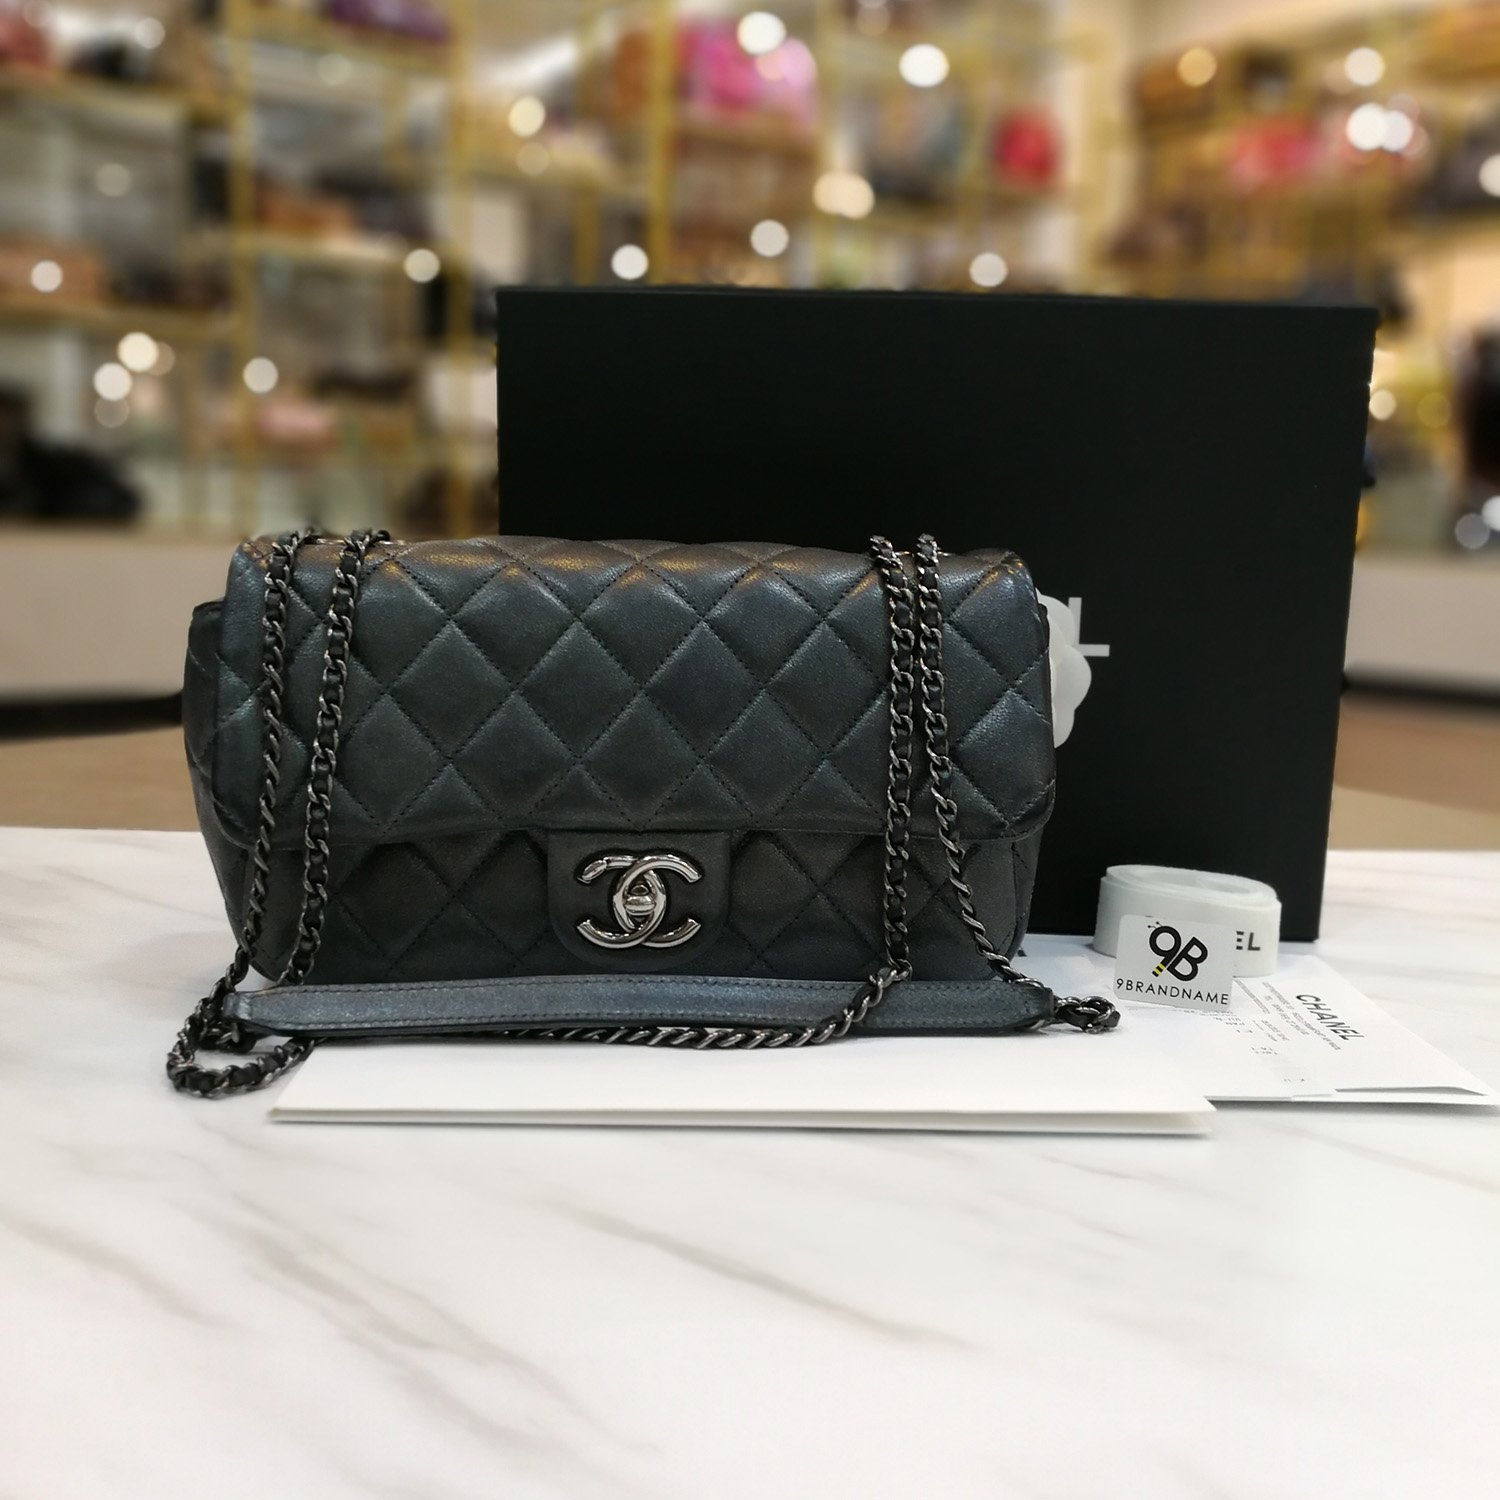 Used -​ Chanel Eyelet Flap Metallic Dark Silver Calfskin Quilted